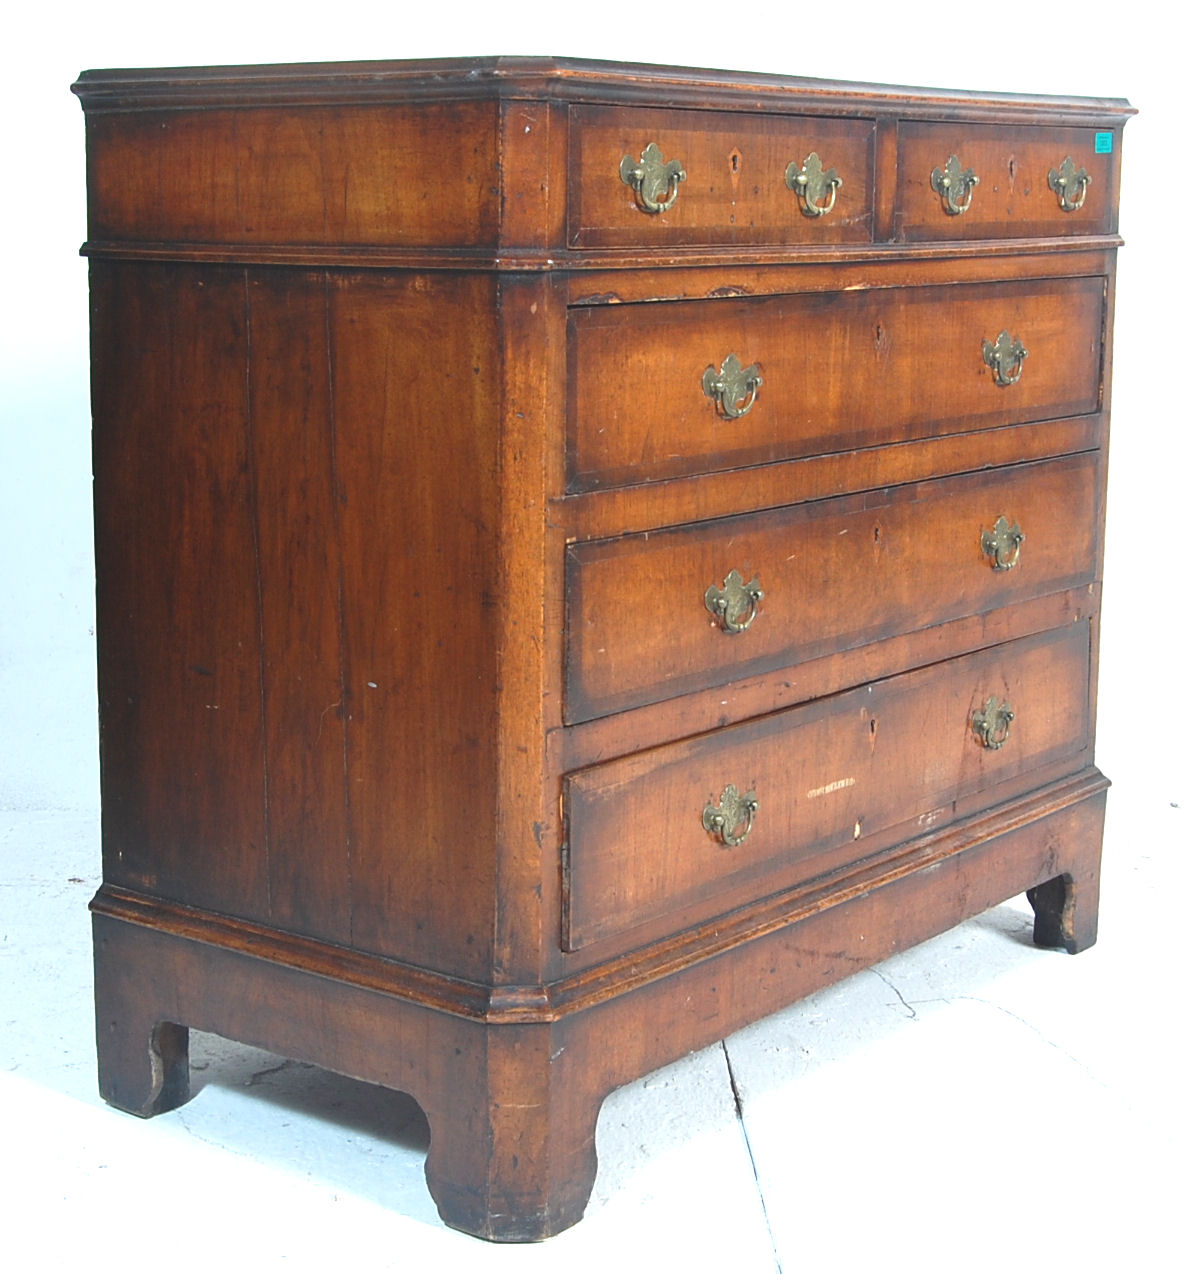 An early 19th century Georgian mahogany chest of drawers having two short drawers over three full